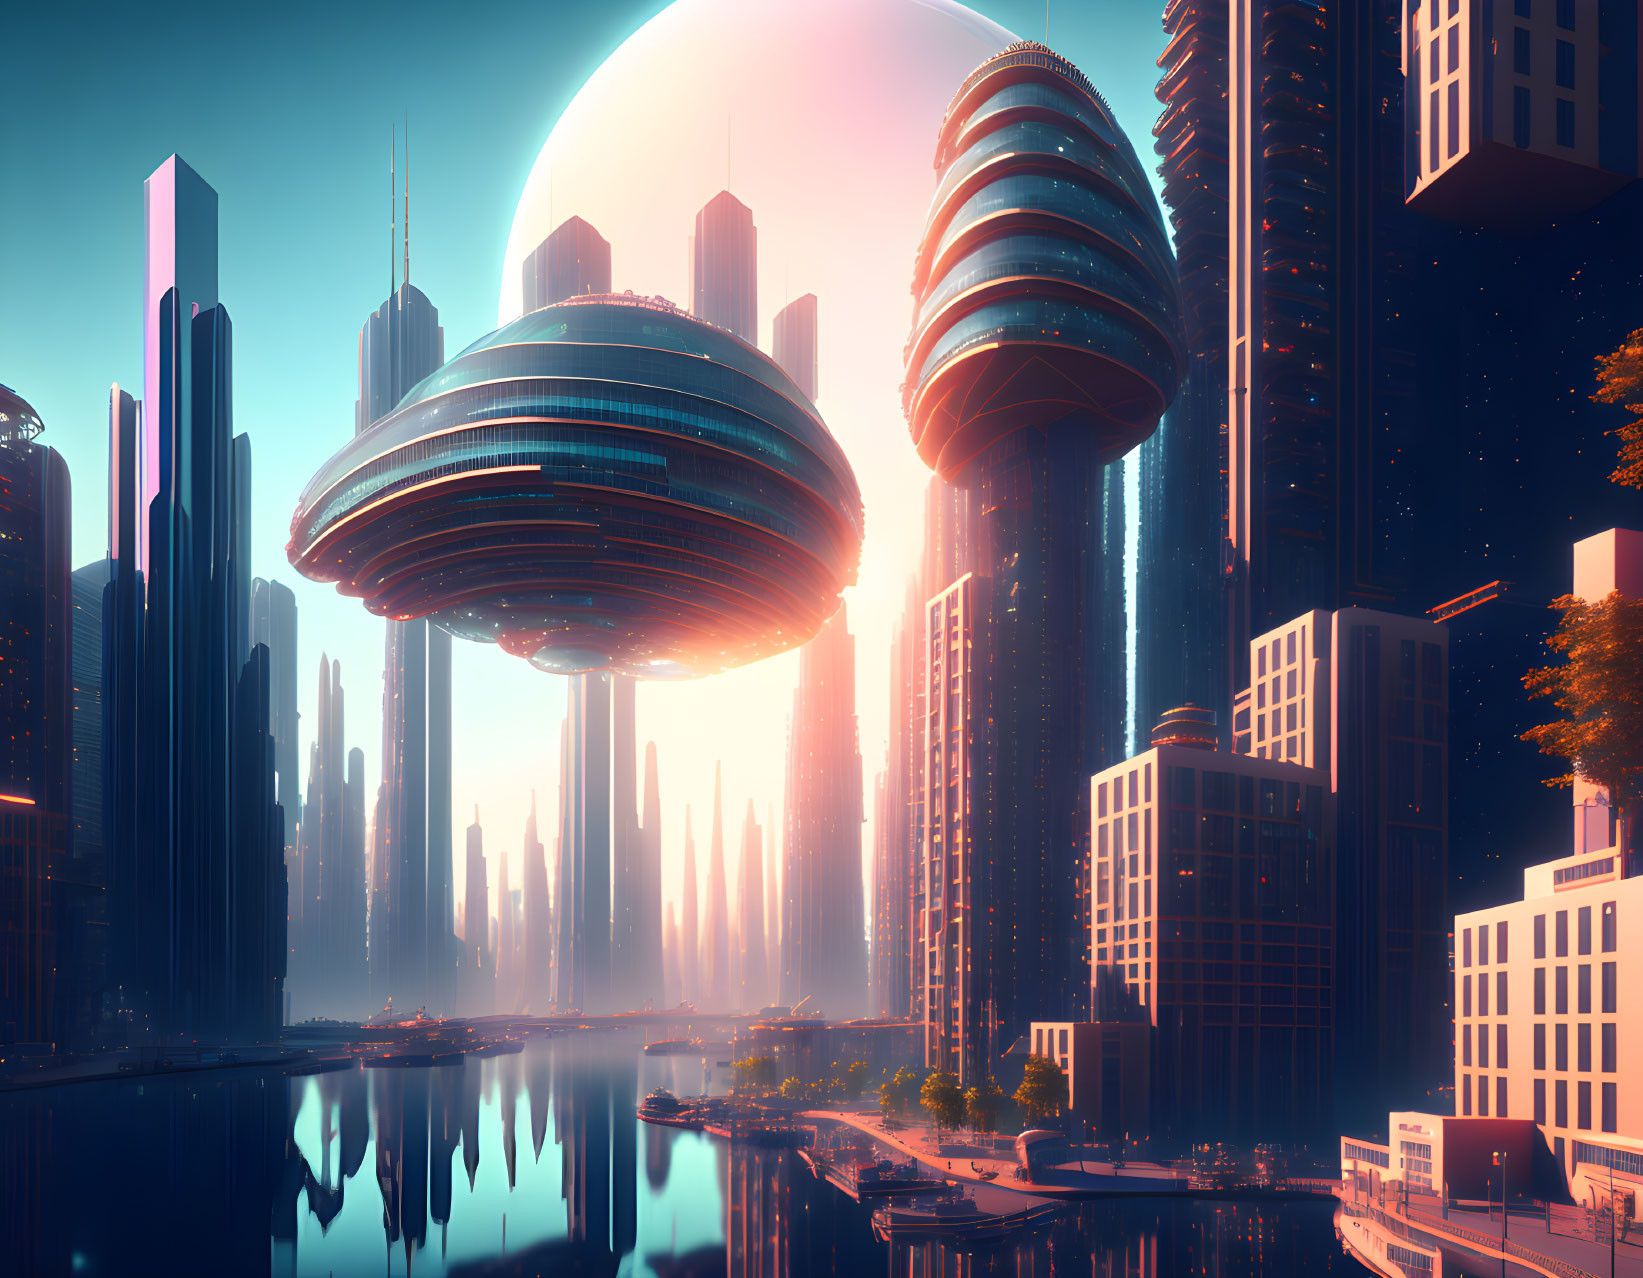 Futuristic cityscape with skyscrapers, spherical buildings, and reflective water at dusk